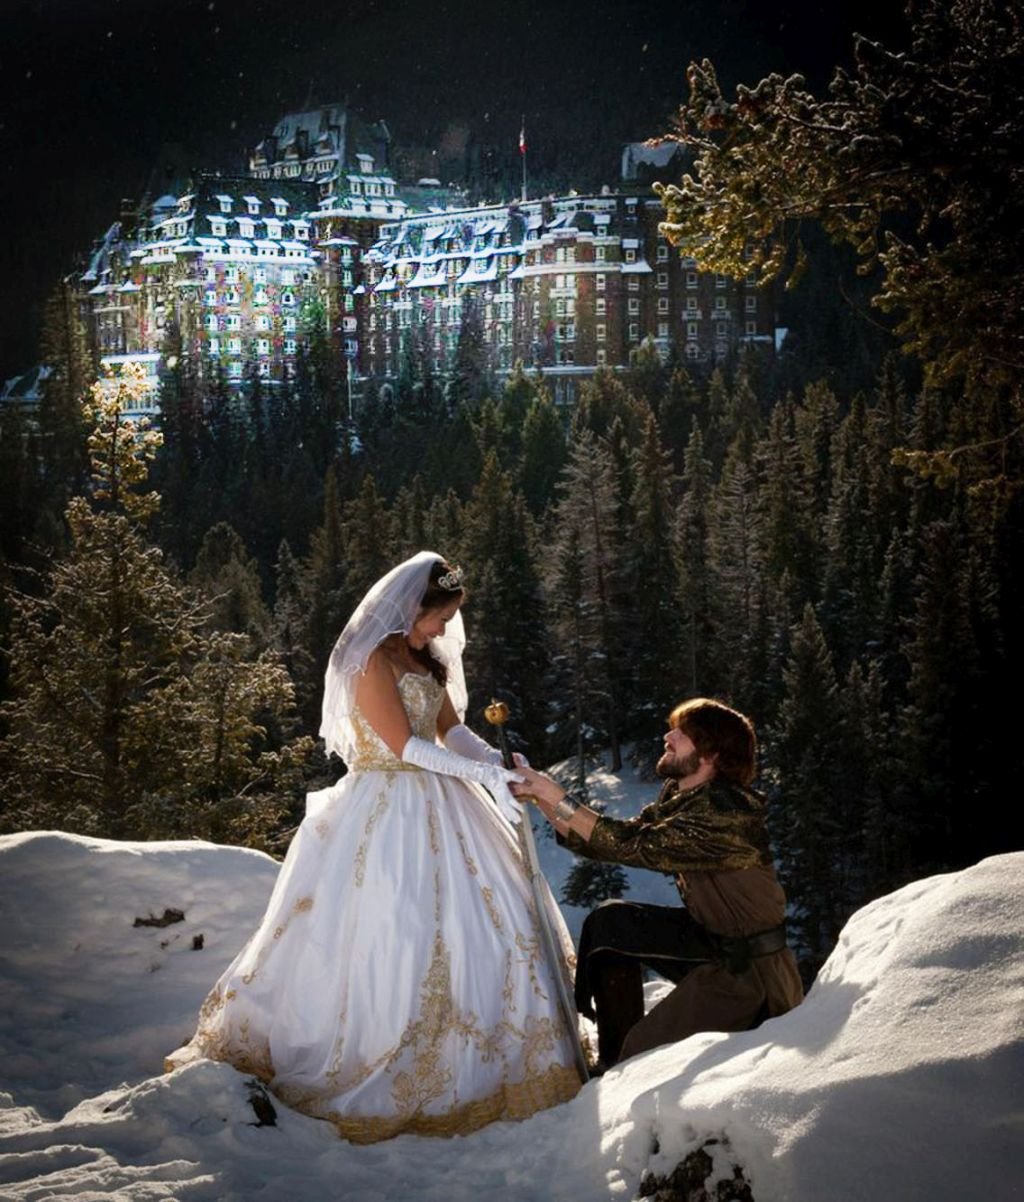 A man weds his princess in the snow at foot of Banff Springs Hotel